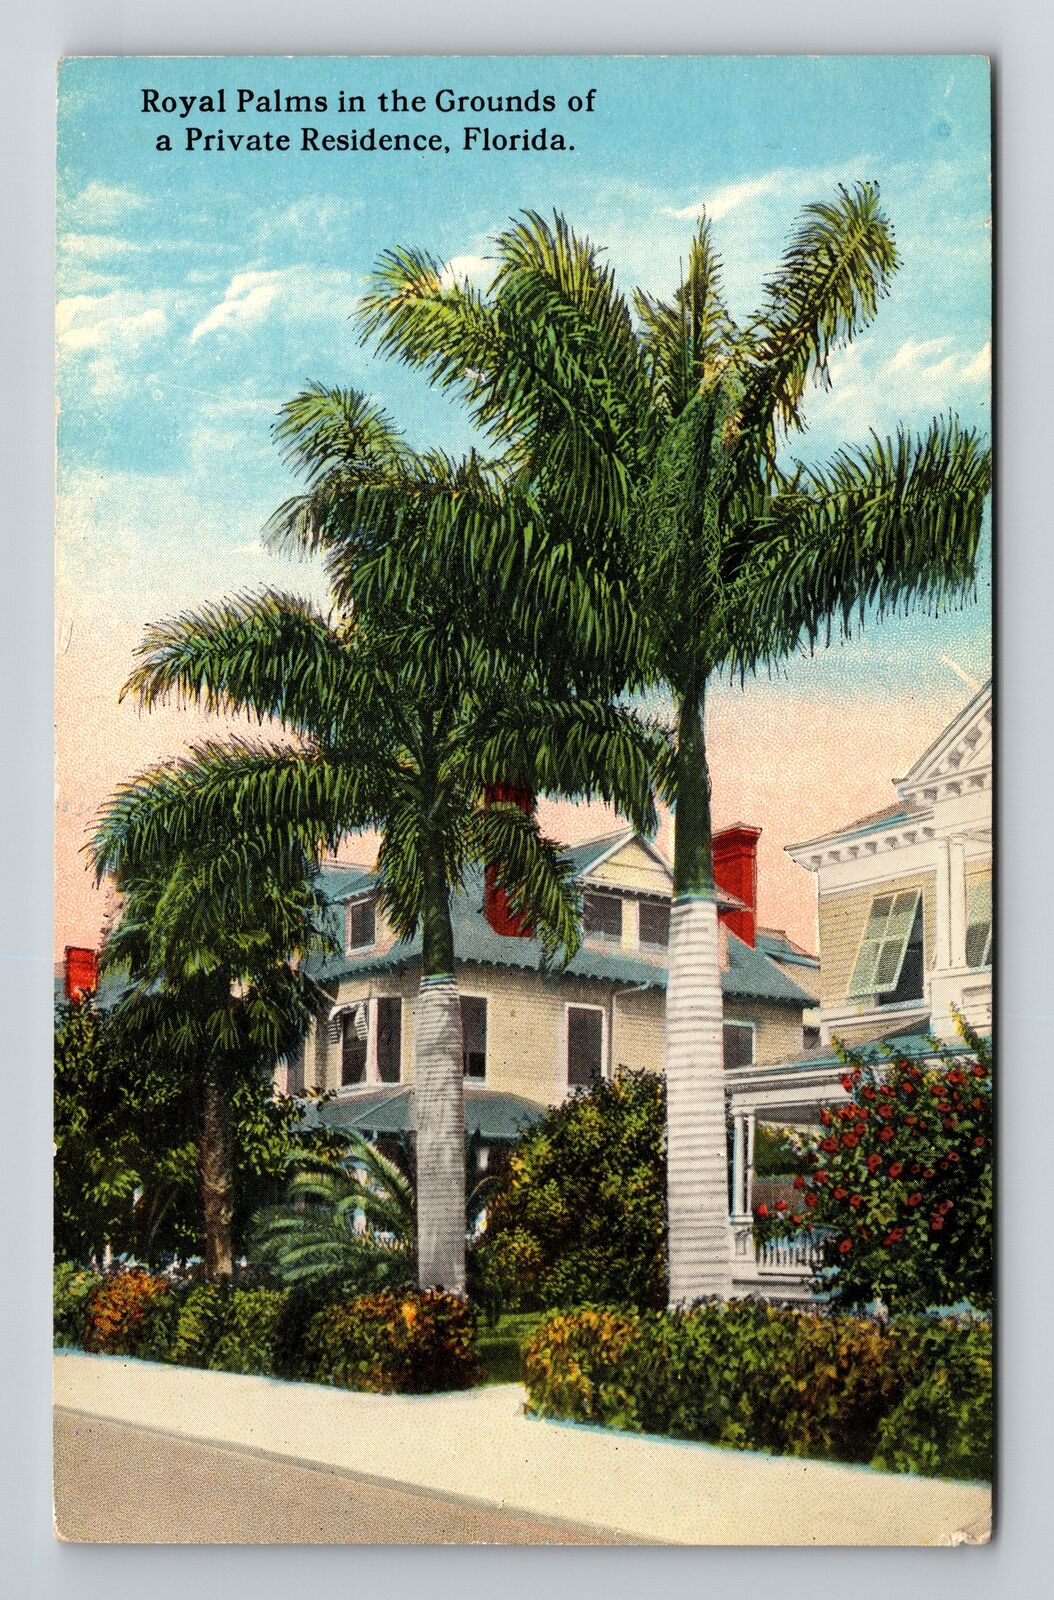 FL-Florida, Royal Palm in the Grounds a Private Residence, Vintage Postcard